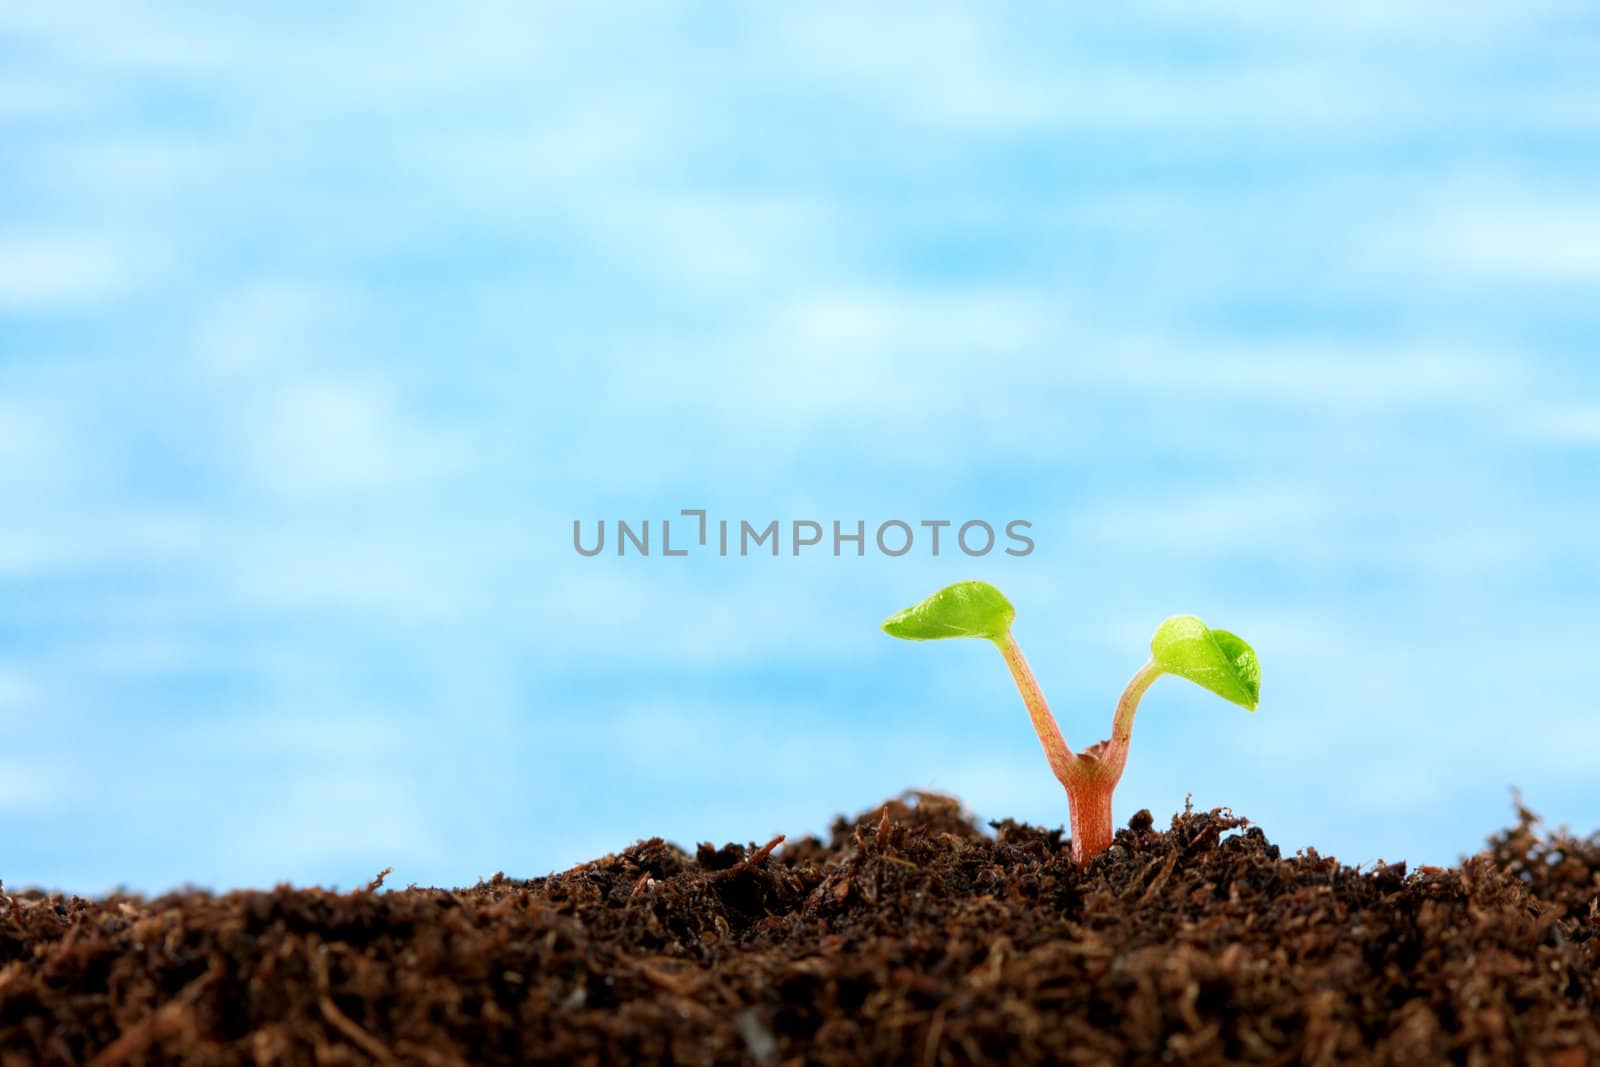 A new plant sprouting from the soil with a blue sky in the background.